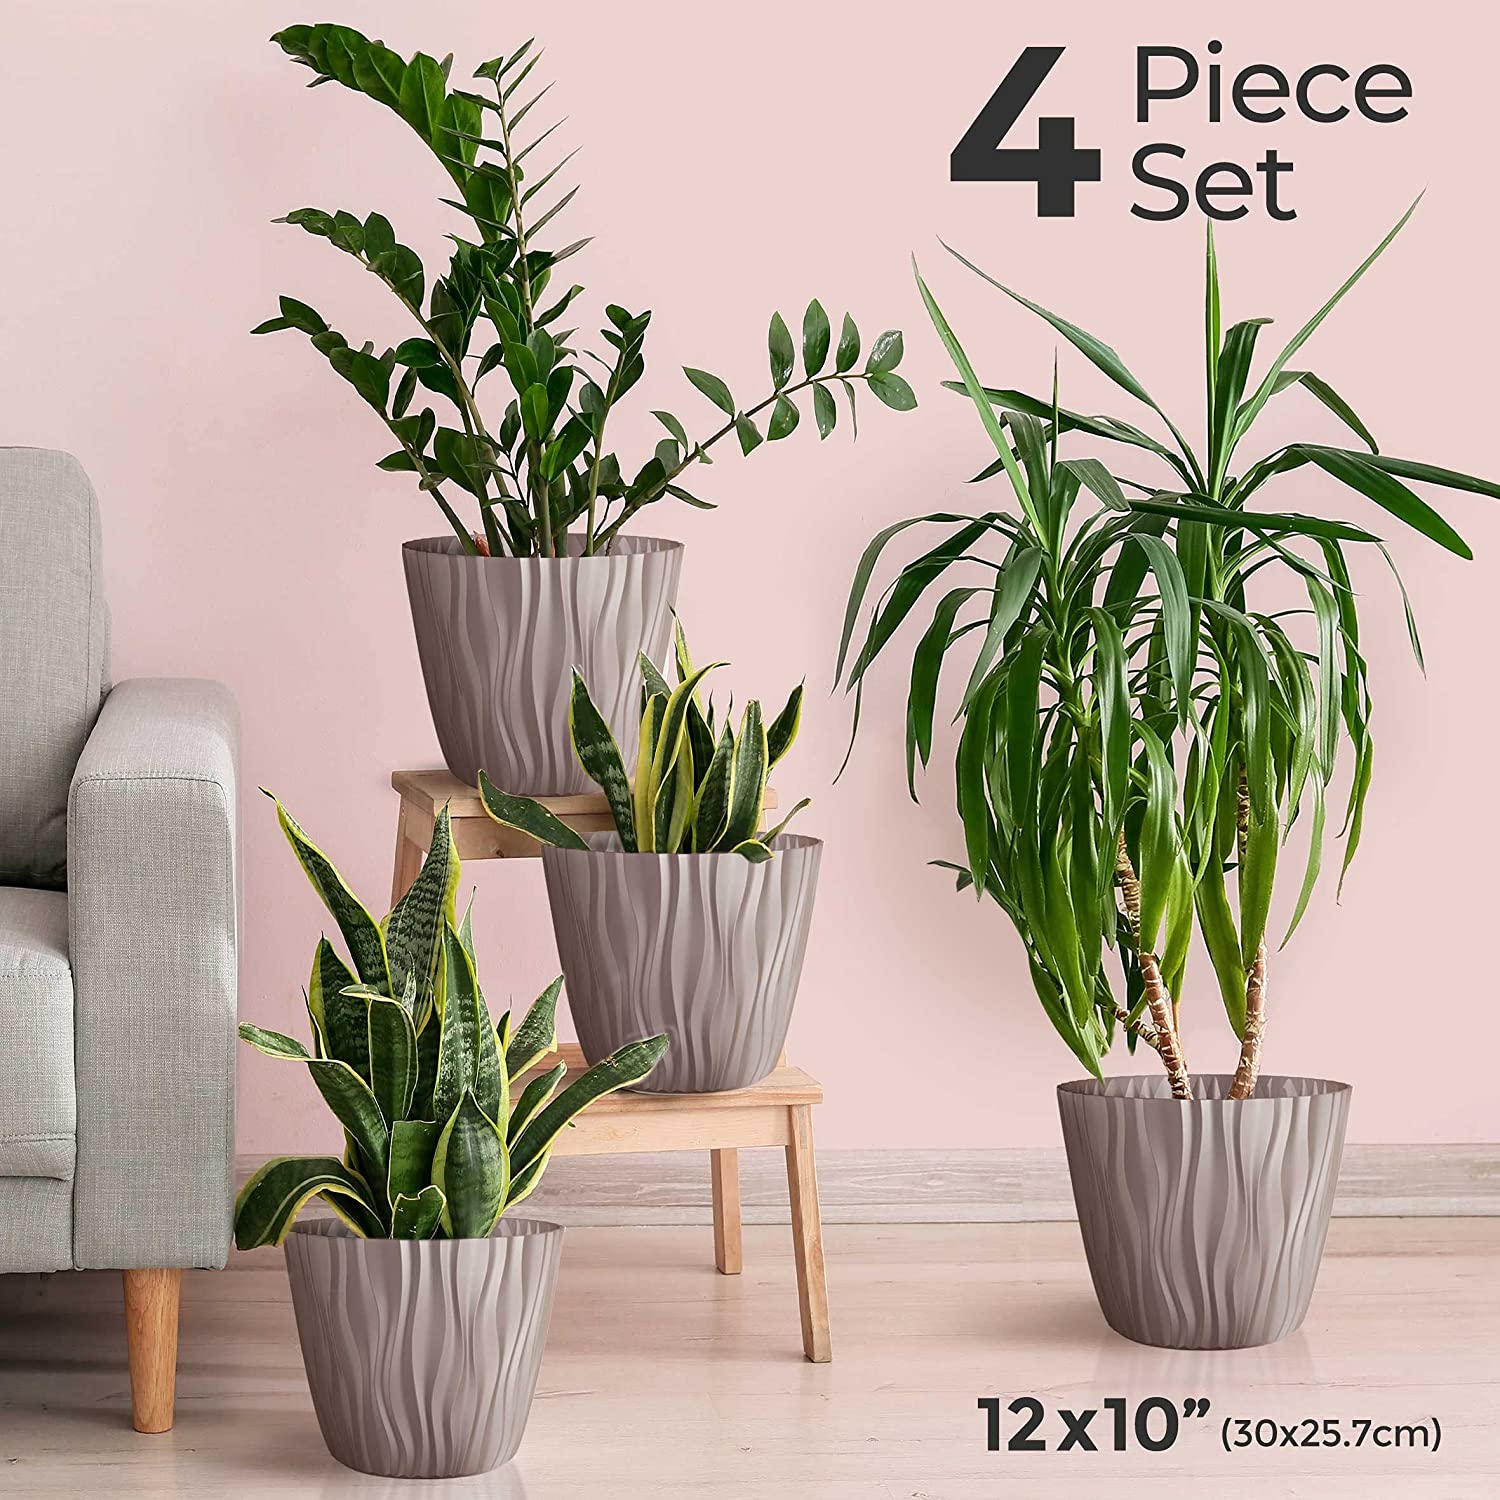 mullerhome_Decorative-Plant-and-Flower-Pots – Extra Large 4 Piece Mocca Set-2